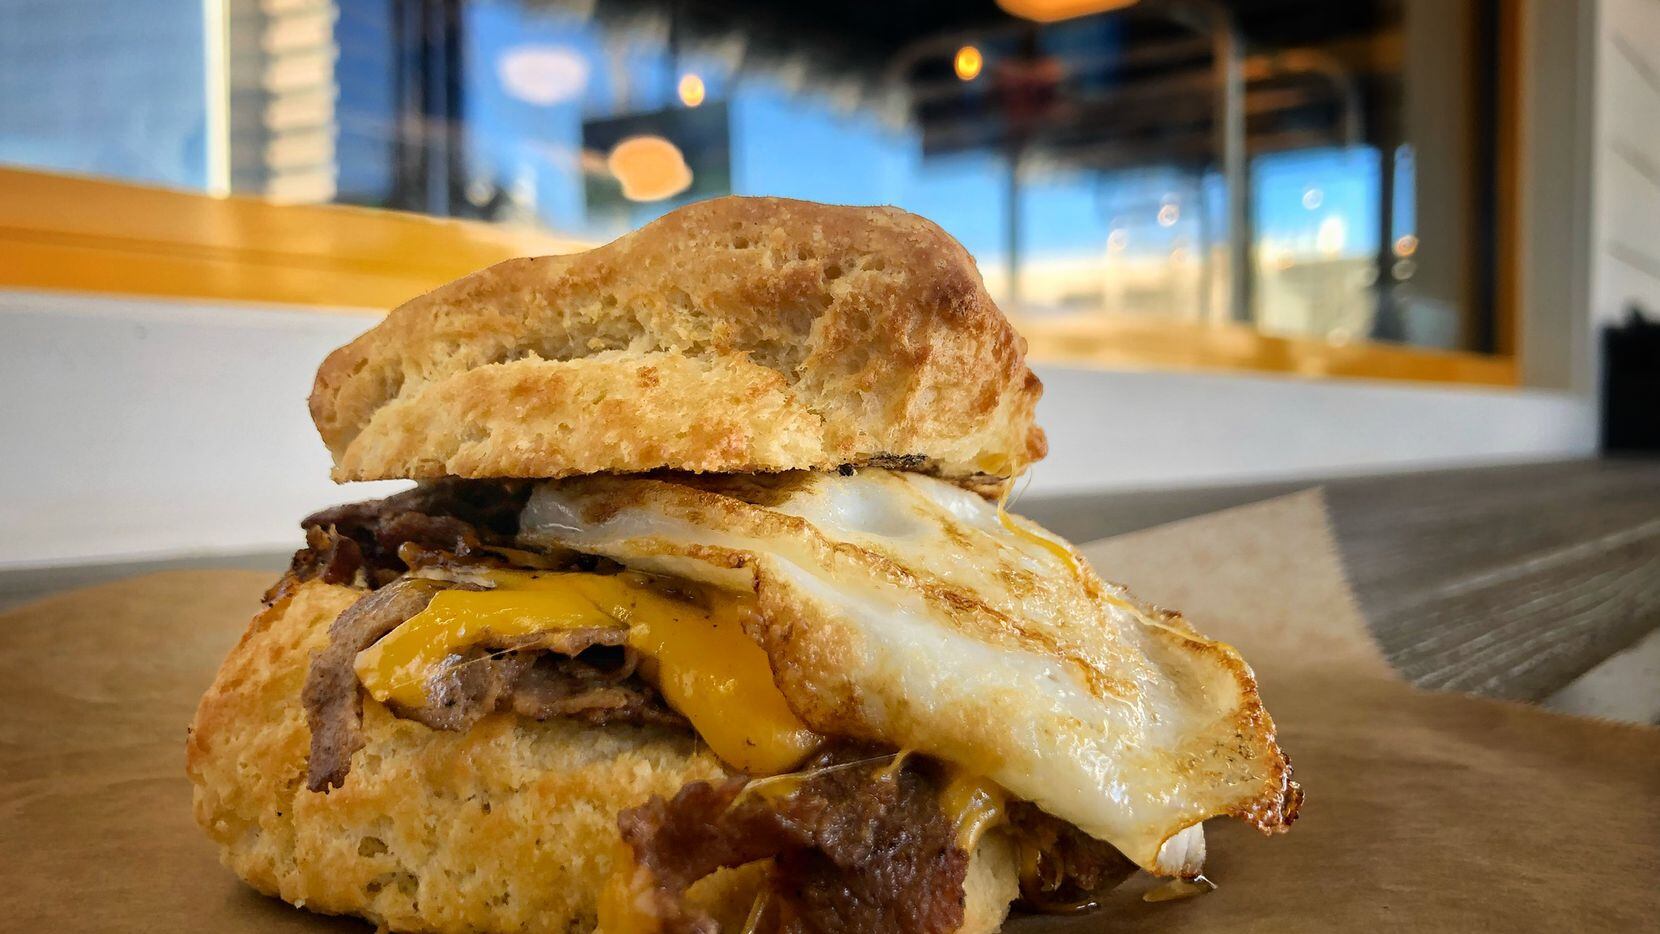 If this Steak & Egg Sandwich could talk, what would it say?